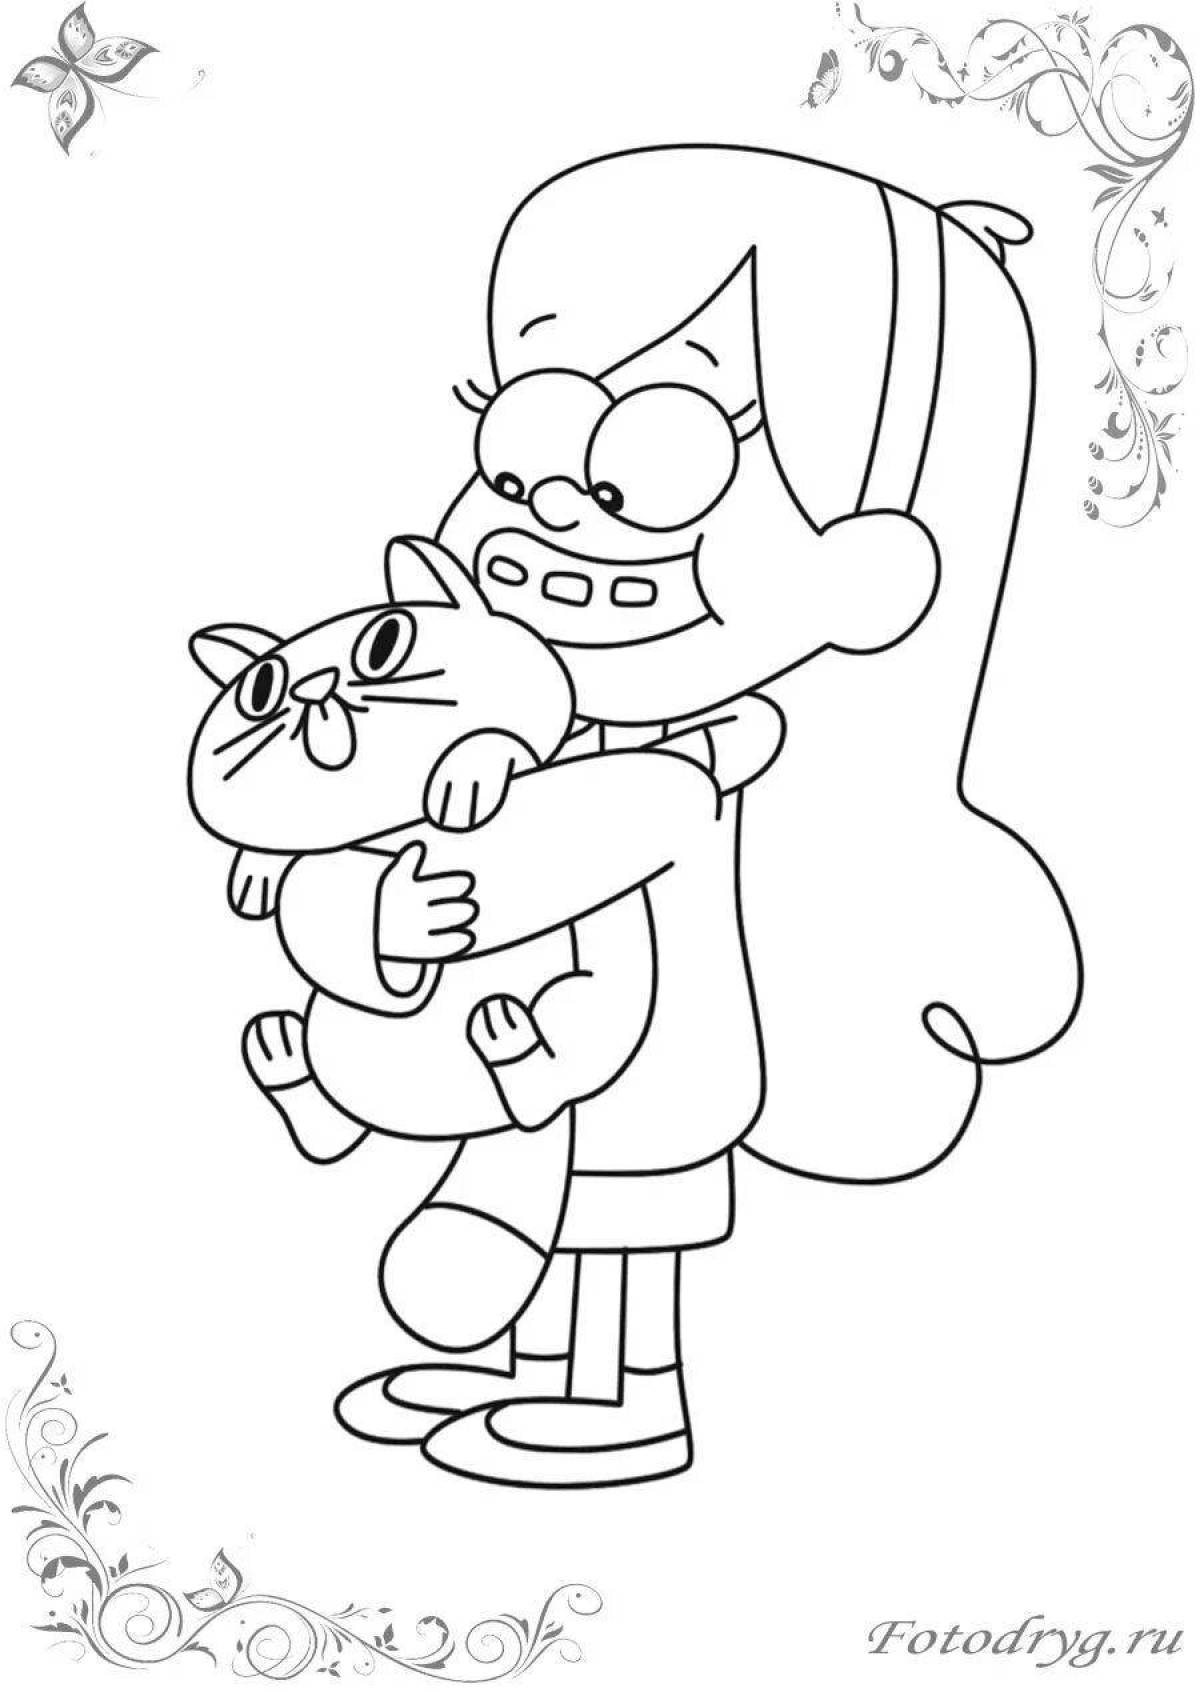 Gravity falls a couple of times #2